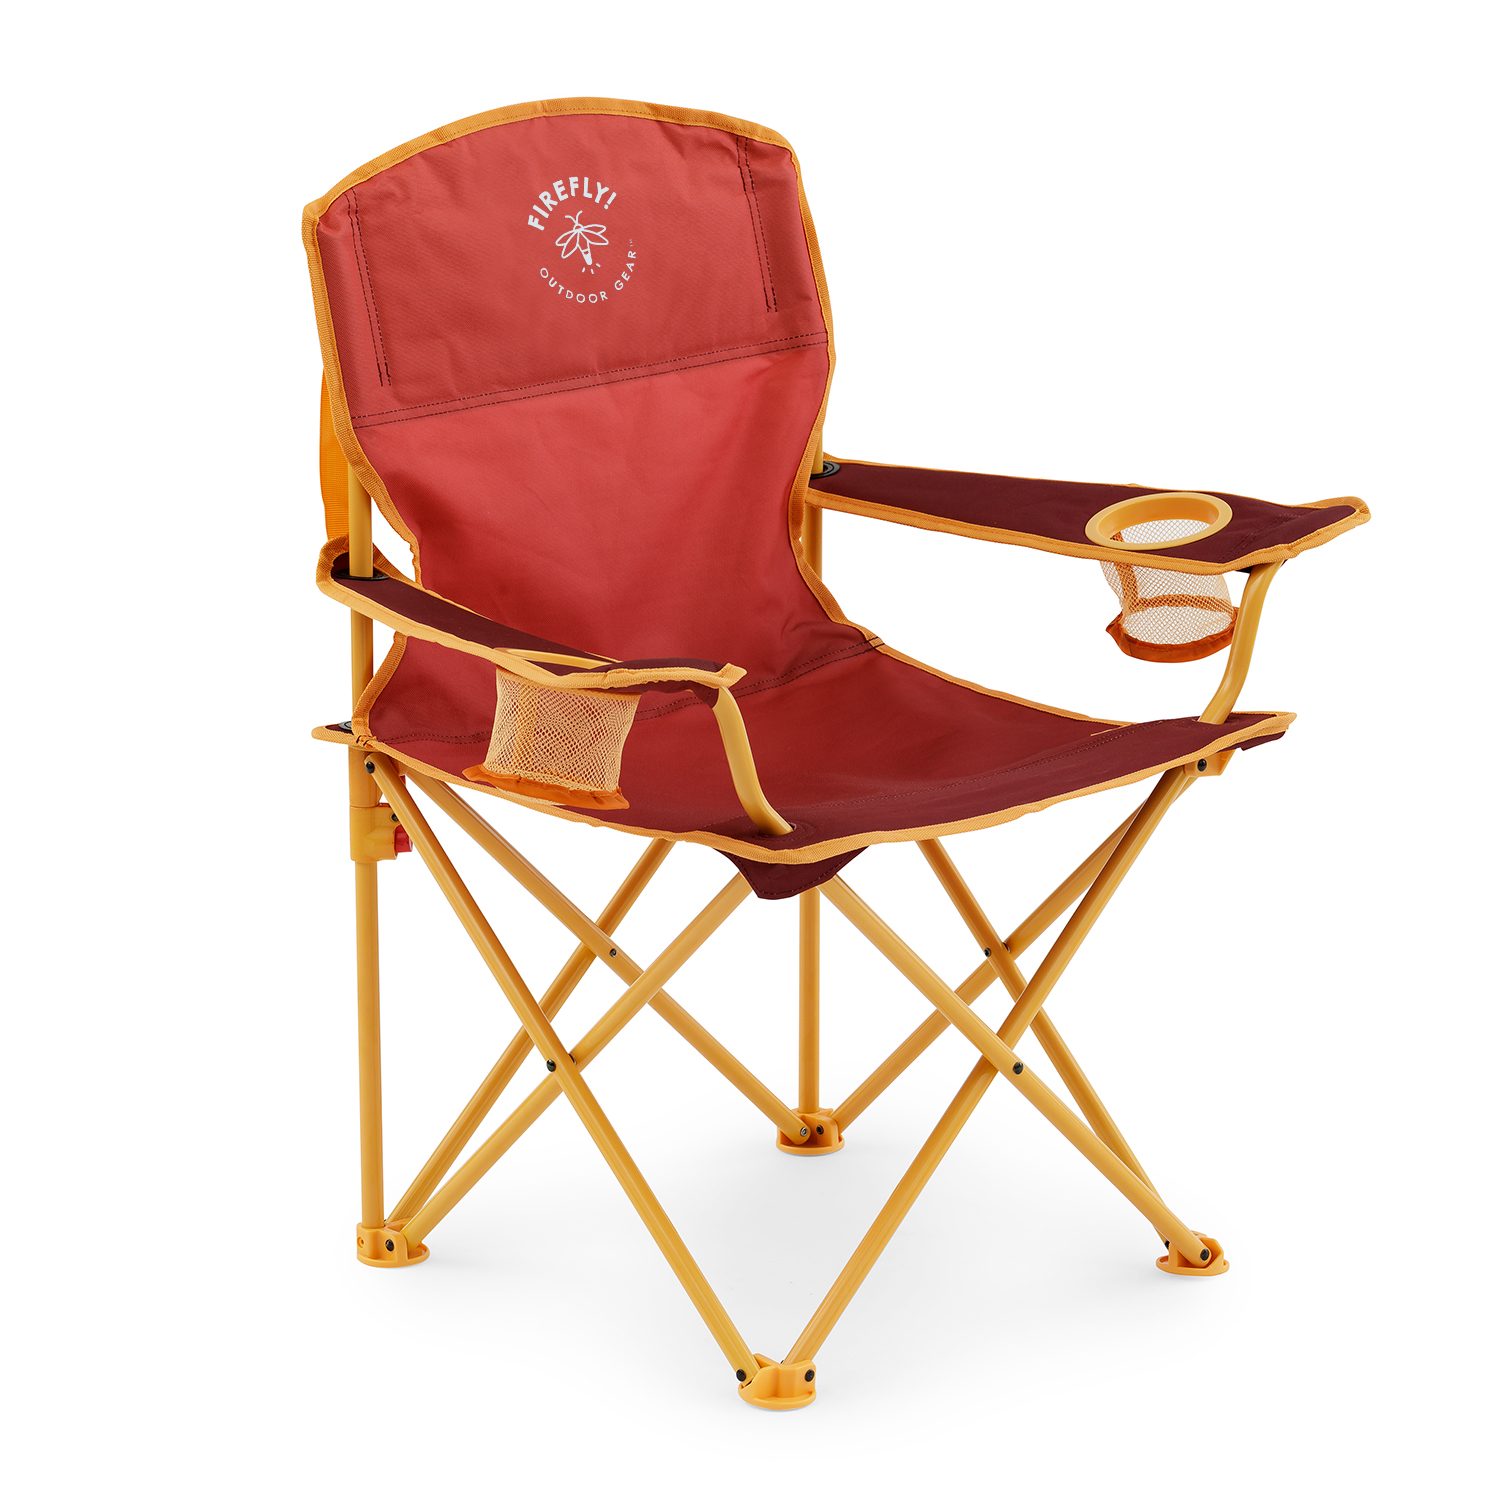 Firefly! Outdoor Gear Youth Camping Chair - Red/Orange Color - image 1 of 9